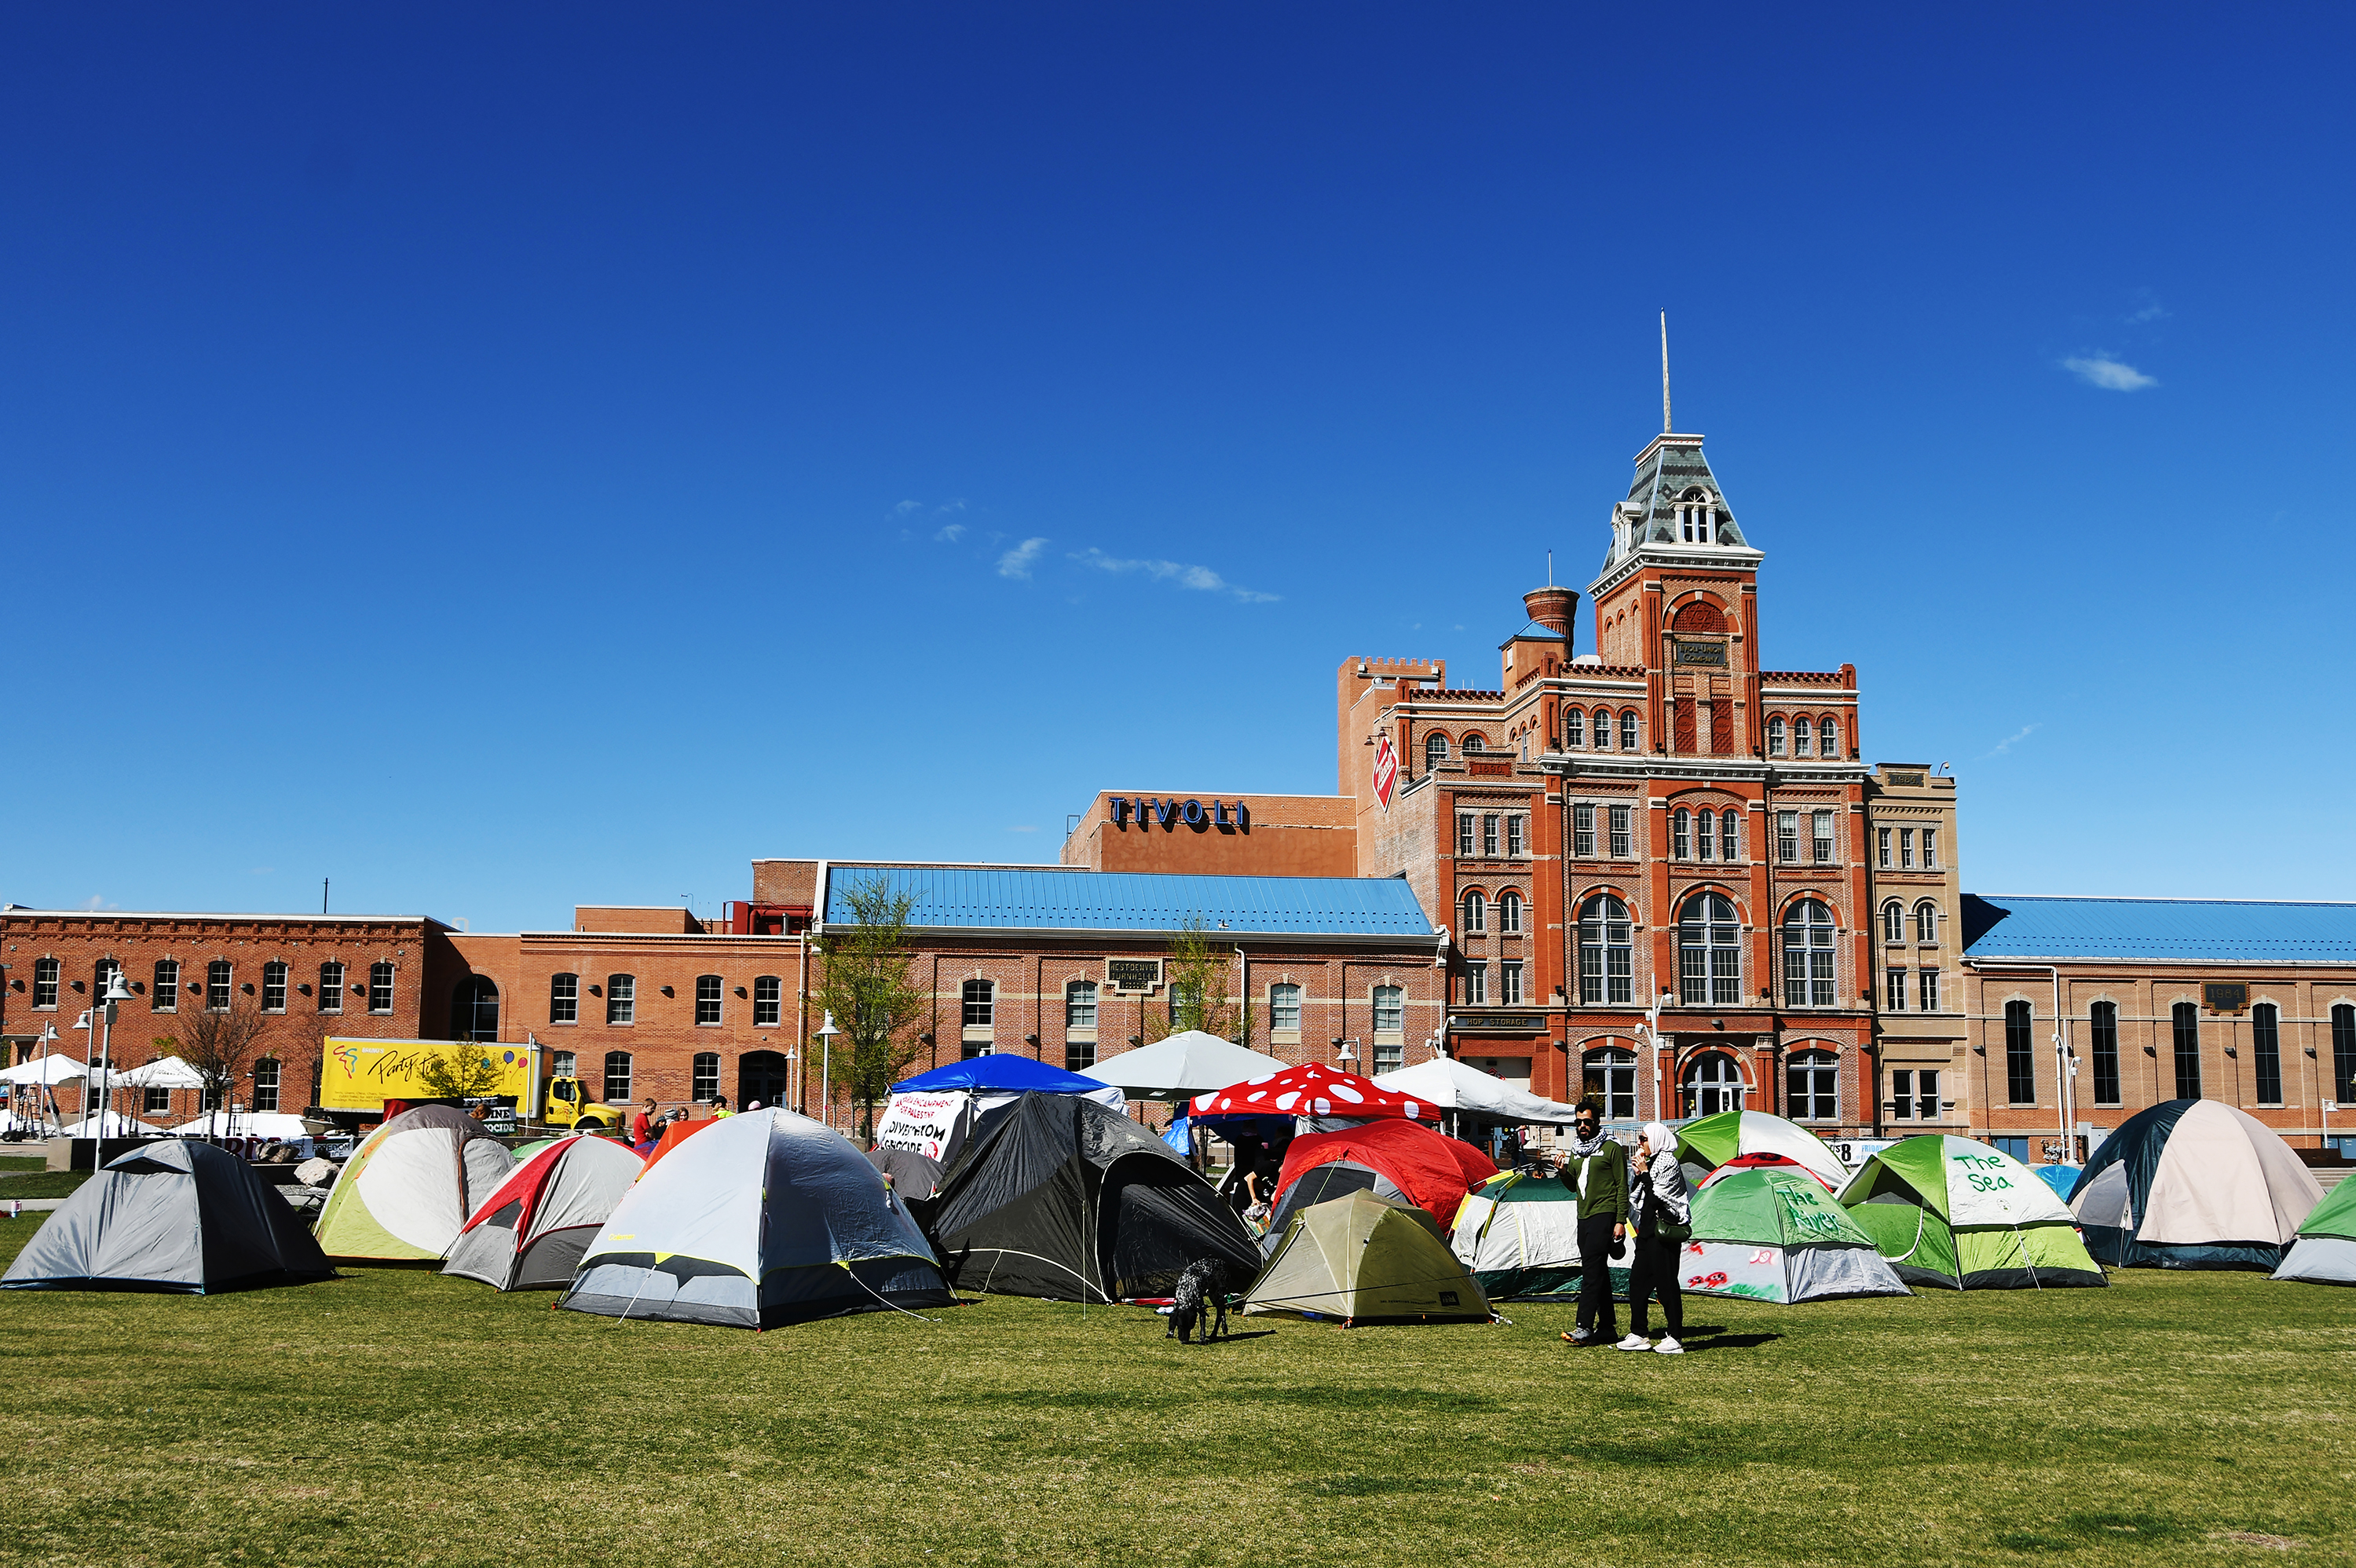 Pro-Palestinian protestors set up about 30 tents for a "sit-in" protest of the war in Gaza at Auraria campus in Denver, Colorado on April 26.